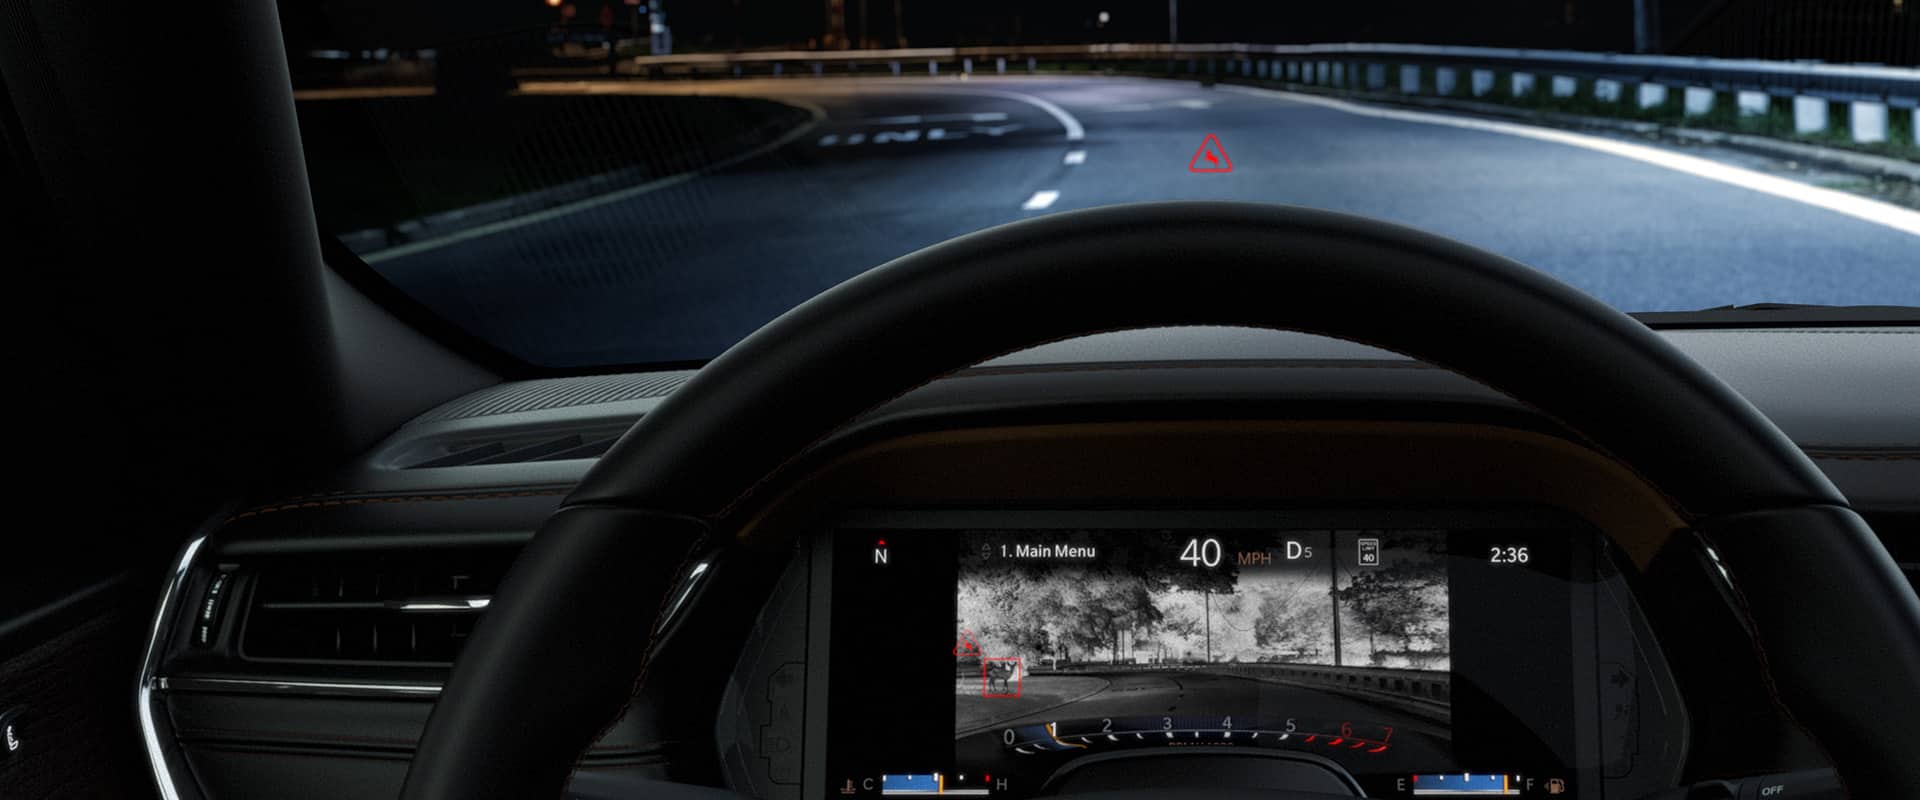 The interior of the 2024 Jeep Grand Cherokee from the driver's perspective, demonstrating through the windshield that the vehicle is being driven on a highway in the dark, as the Driver Information Digital Cluster displays a night vision image of the road ahead, revealing a deer near the roadway.